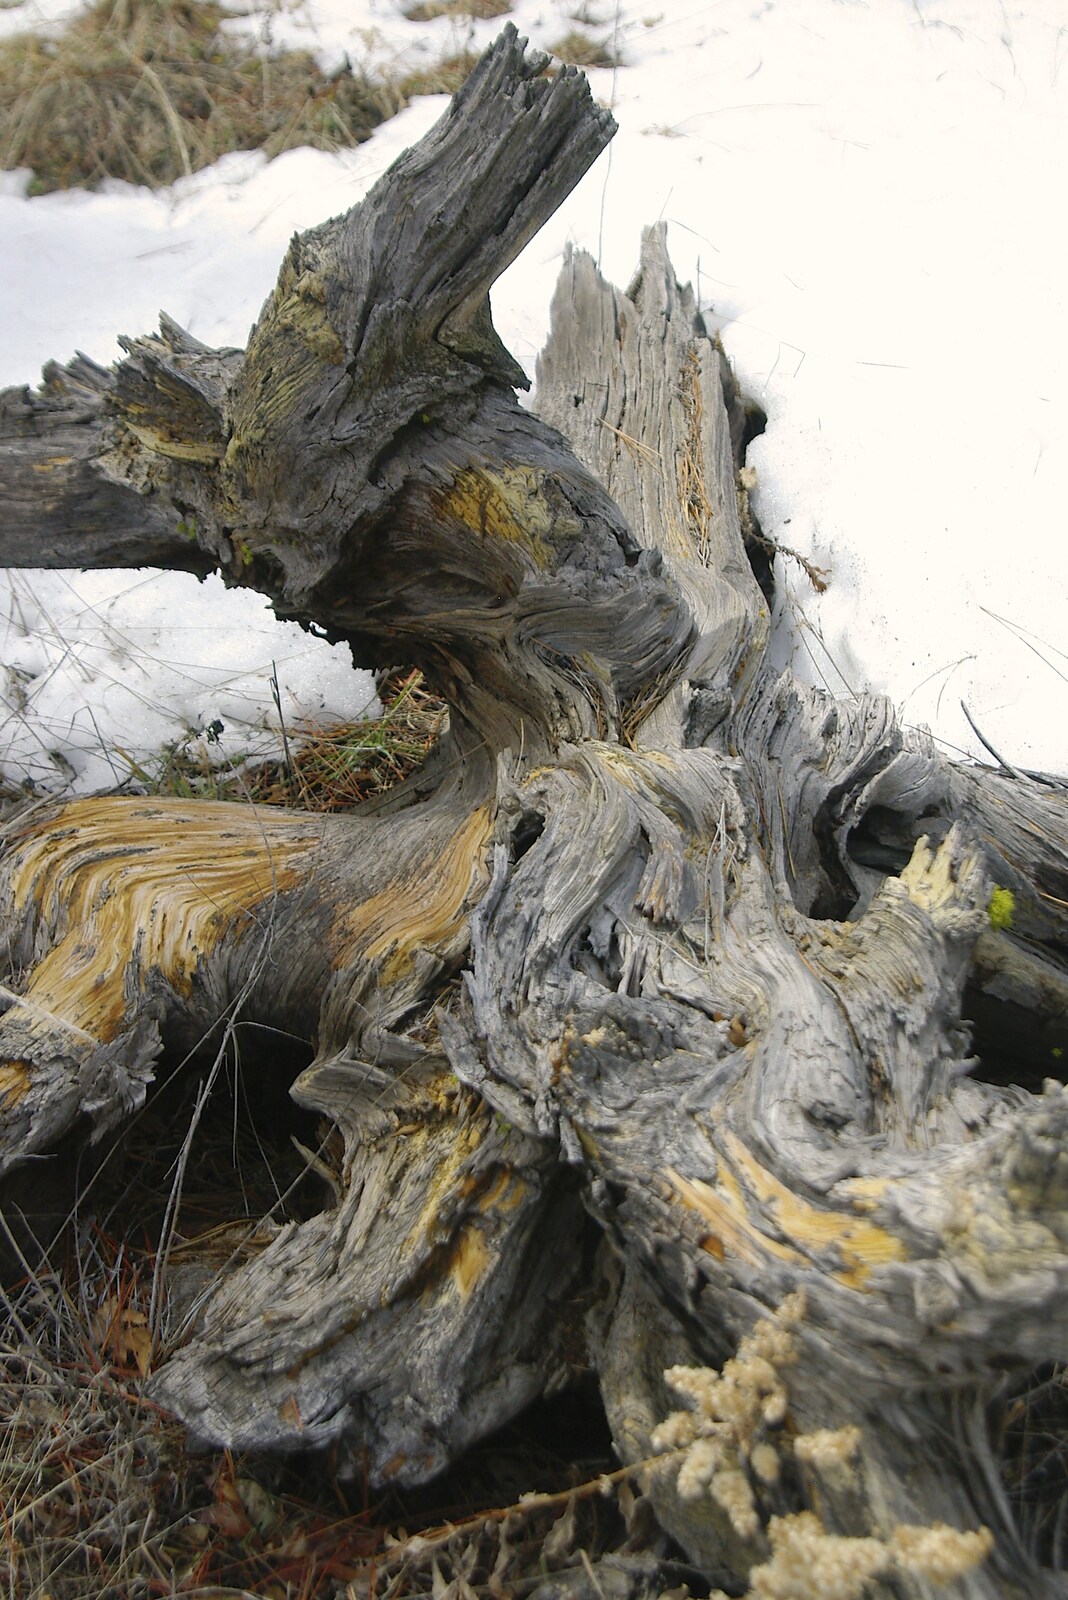 A gnarled stump from California Snow: San Bernadino State Forest, California, US - 26th March 2006